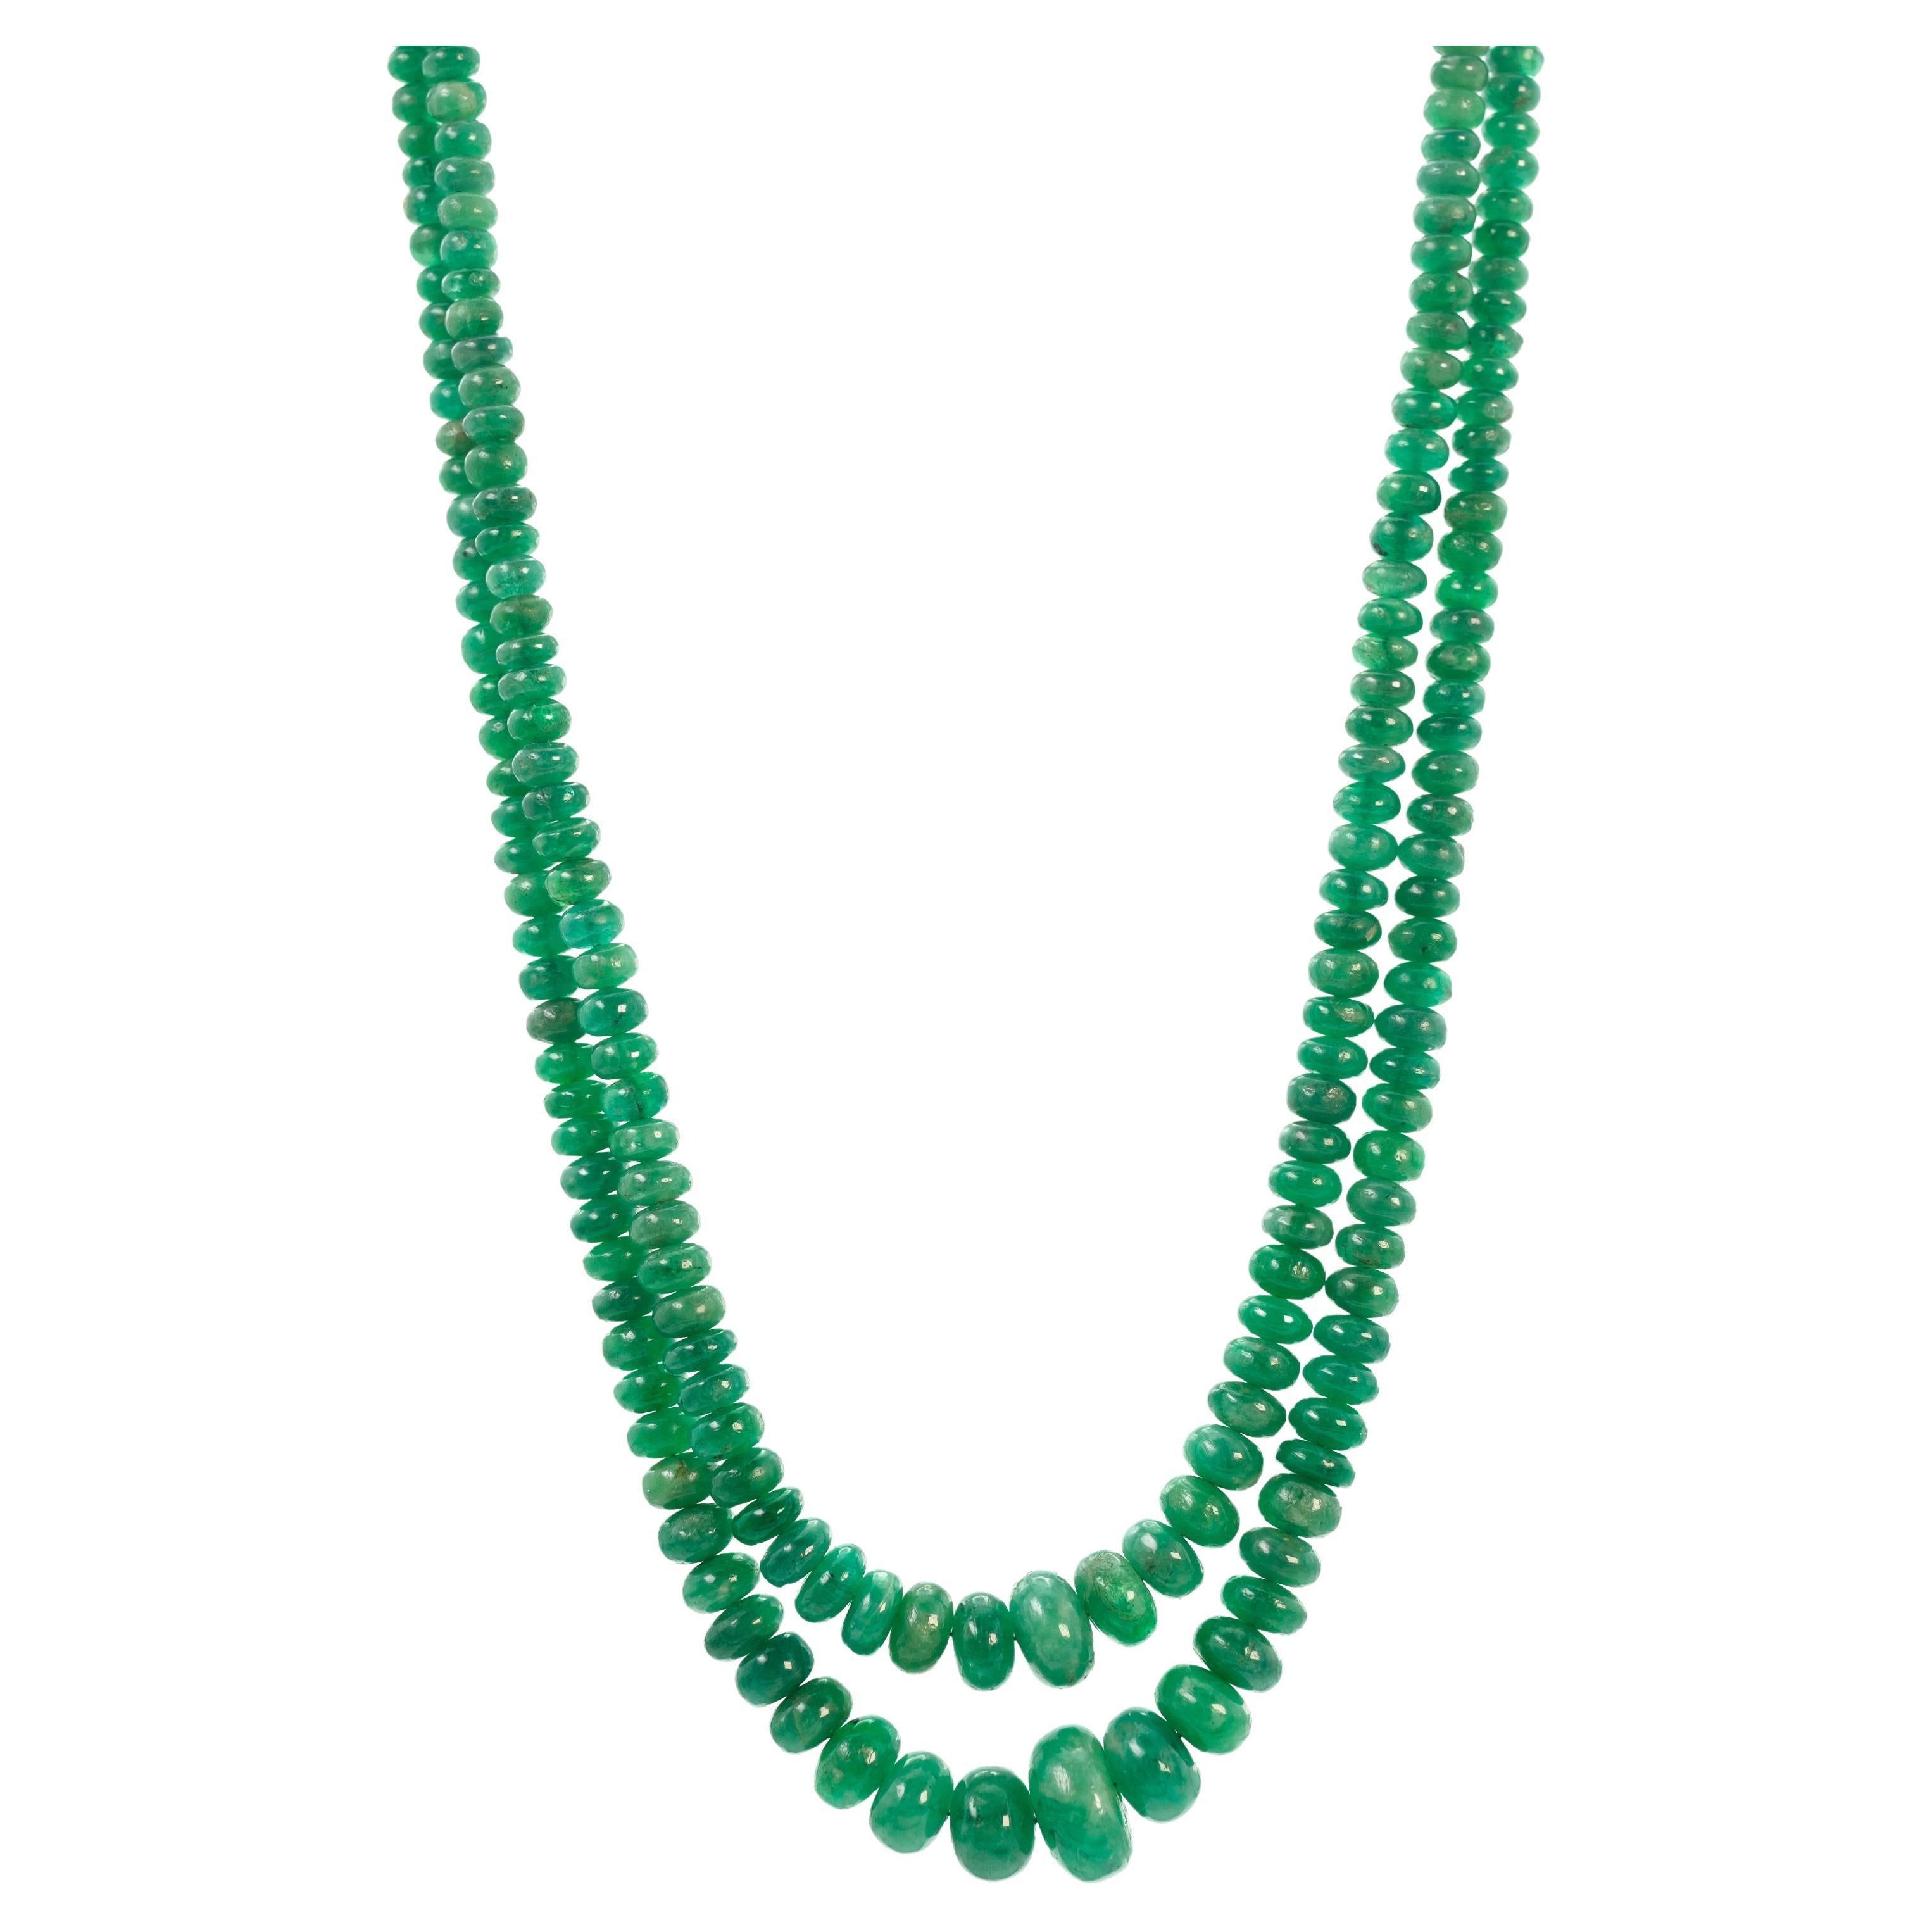 This necklace features approximately 500 emerald beads, meticulously arranged in two strands, with an estimated total weight of 125 carats. The two strands converge at a clasp accentuated by a 14 karat white gold circle pendant. The circular pendant